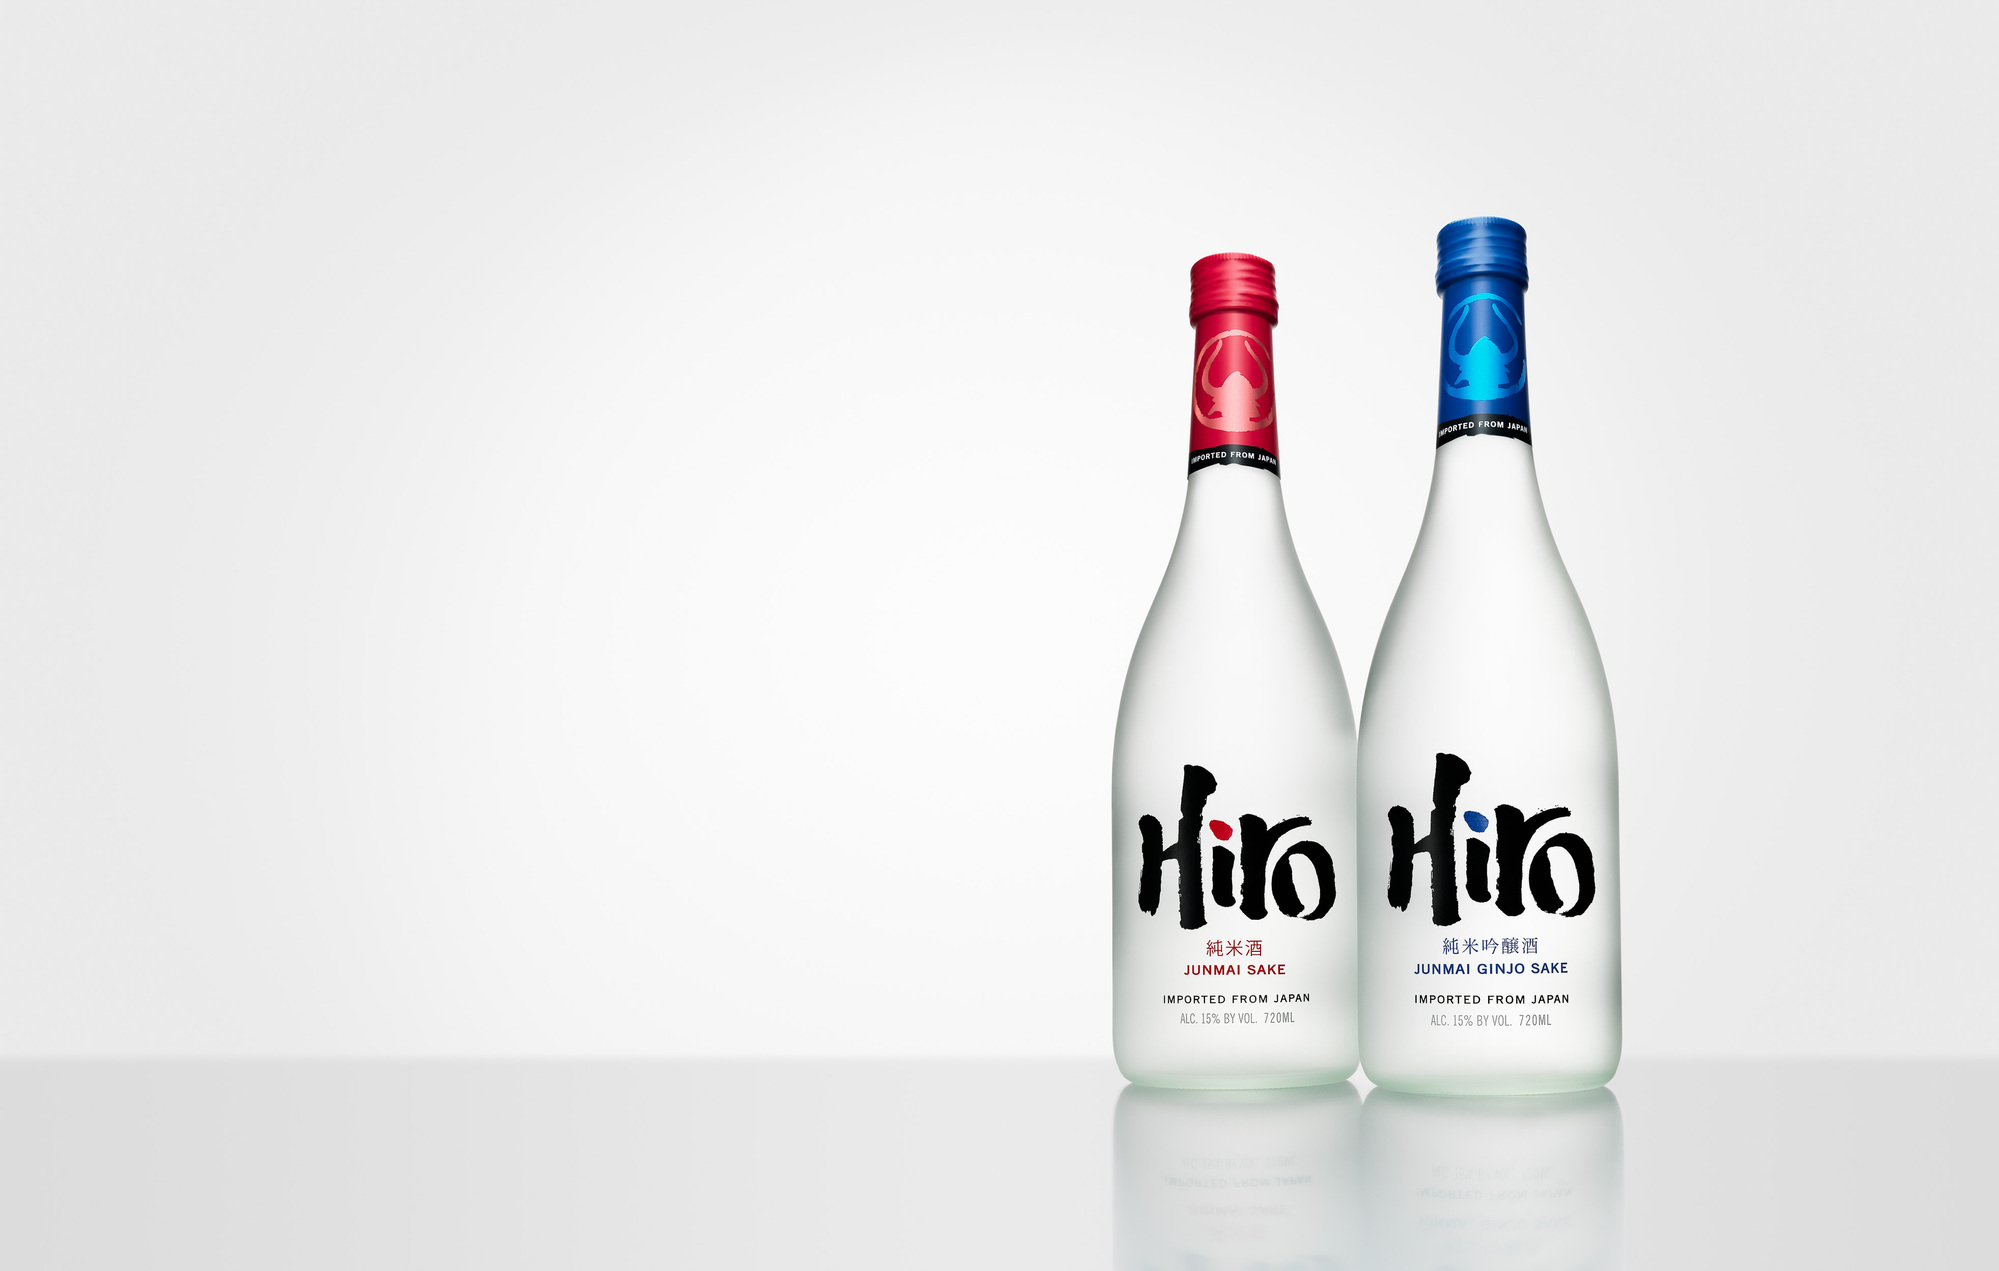 Hiro Sake Rice Wine bottle photography. Beverages and alcohol product & advertising photography by Timothy Hogan Studio in Los Angeles